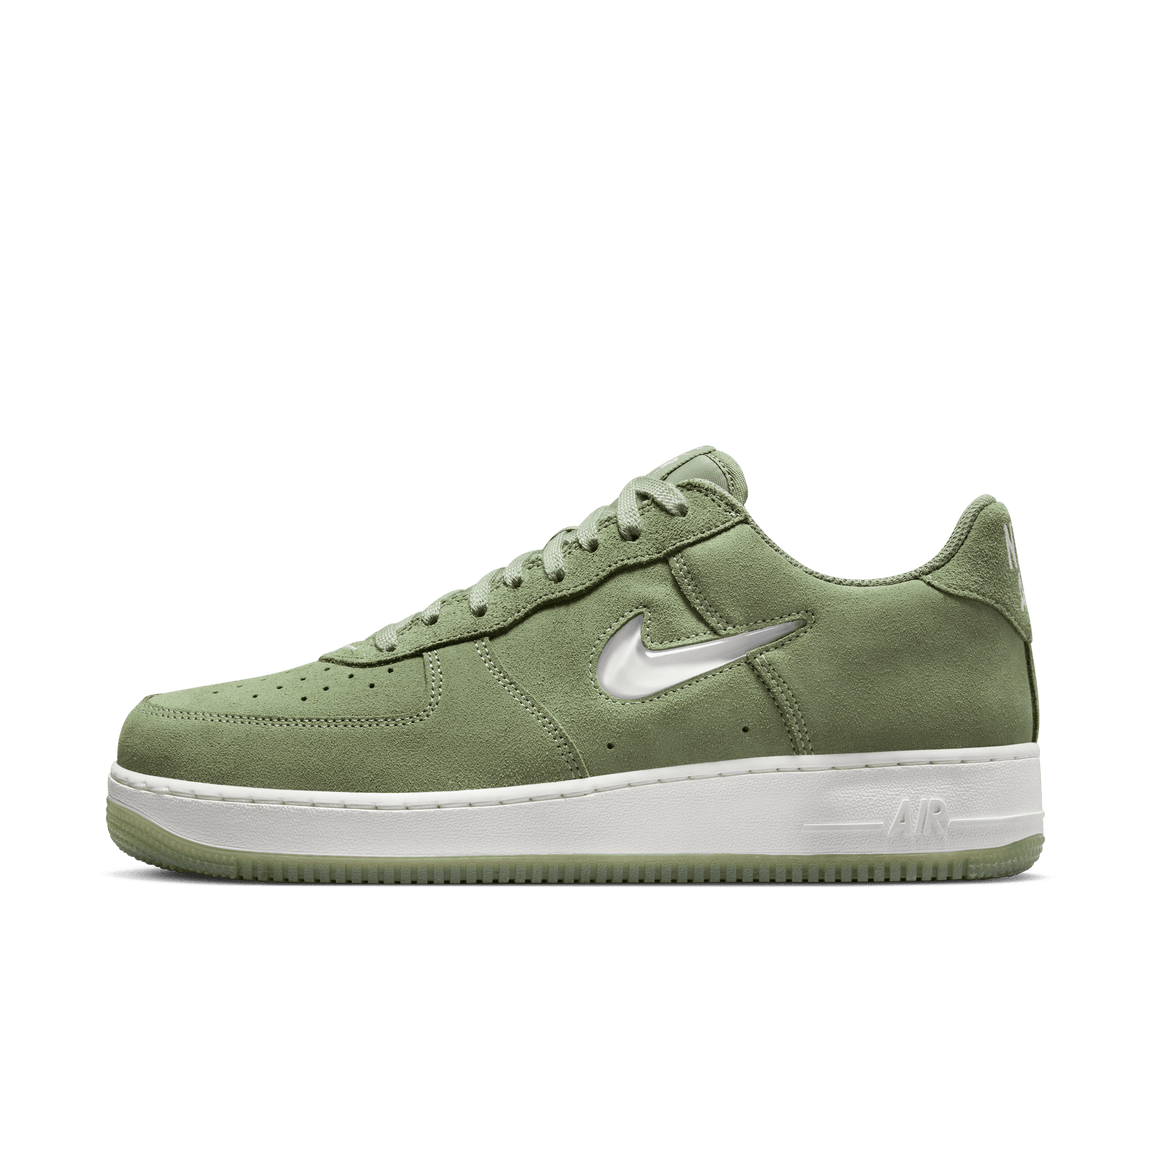 Nike Air Force 1 Low Retro (Oil Green/Summit White) 6/6 - Nike Air Force 1 Low Retro (Oil Green/Summit White) 6/6 - 